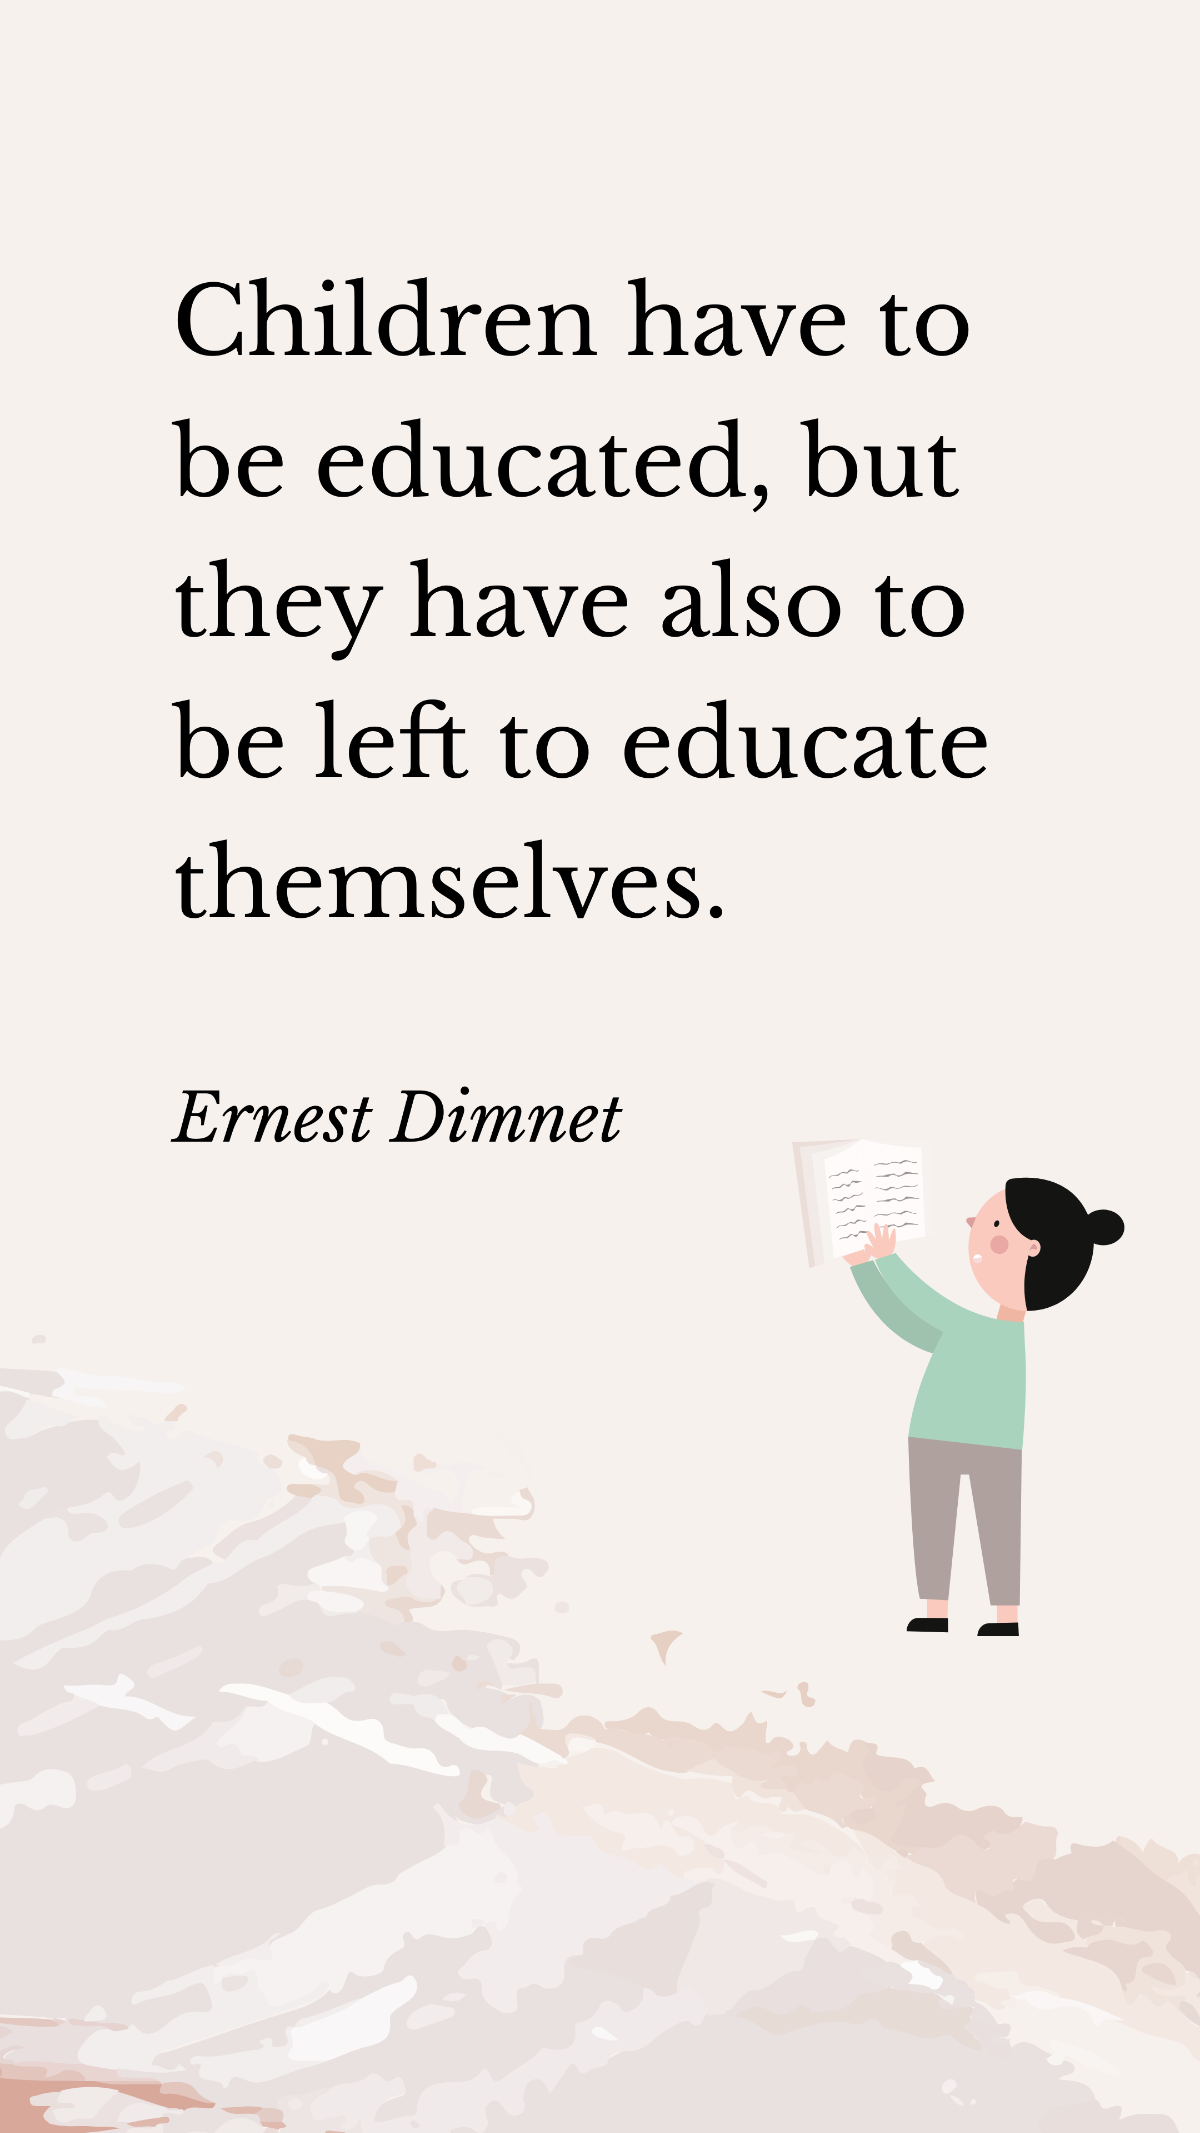 Free Ernest Dimnet - Children have to be educated, but they have also to be left to educate themselves. Template